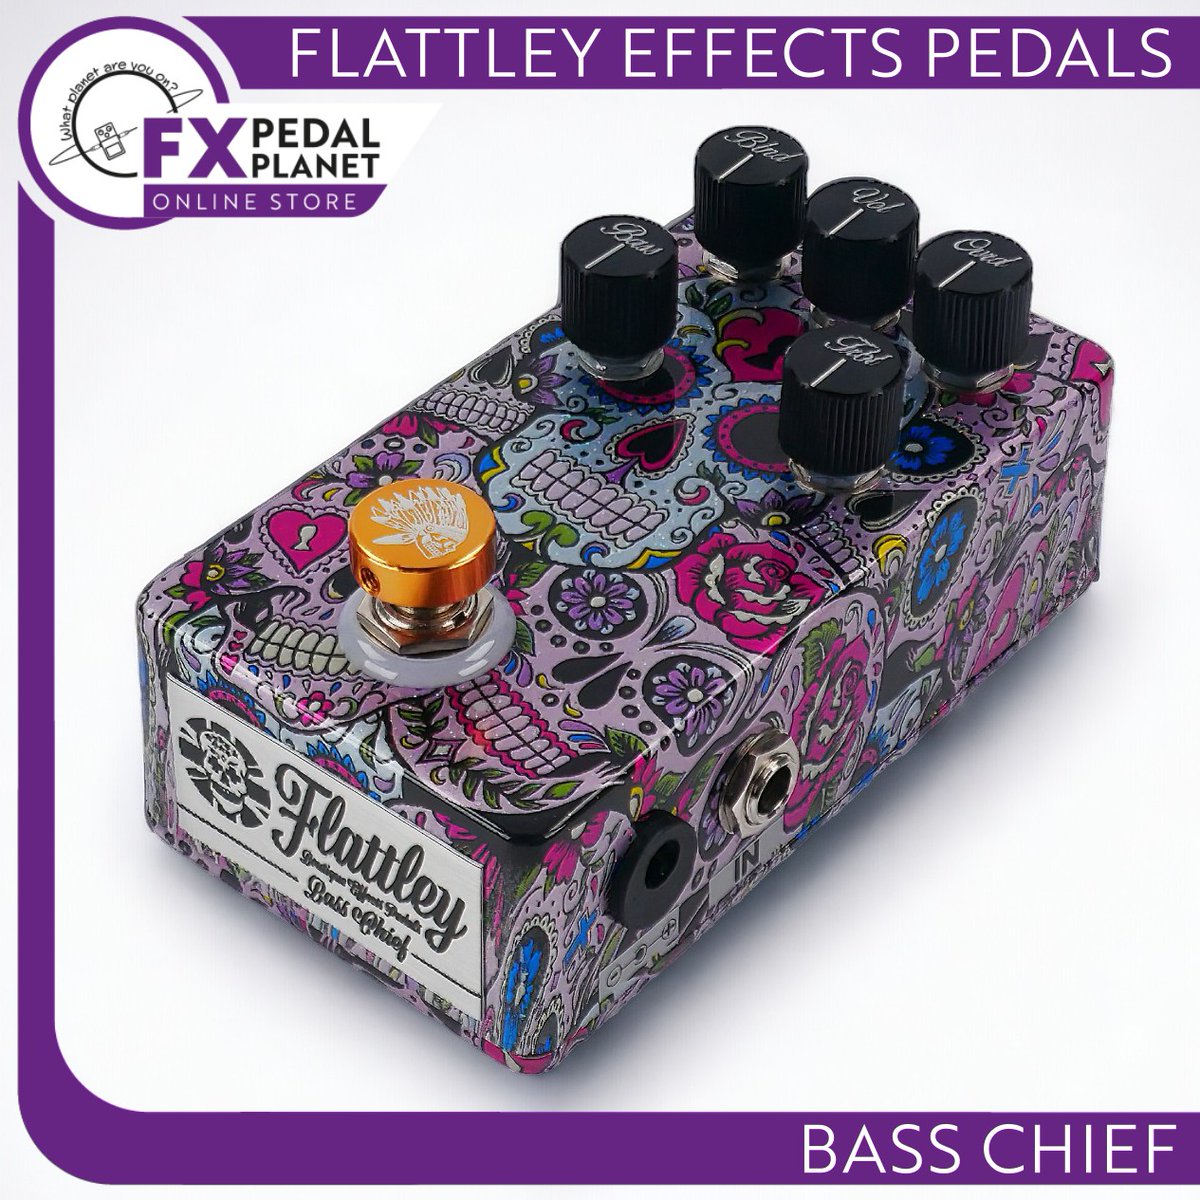 🌟🌟 NEW ARRIVAL 🌟🌟 @fgpuk's Bass Chief: powerful overdrive for bass & guitars. Customisable distortion, tone shaping, and blending. Handcrafted with unique graphics.